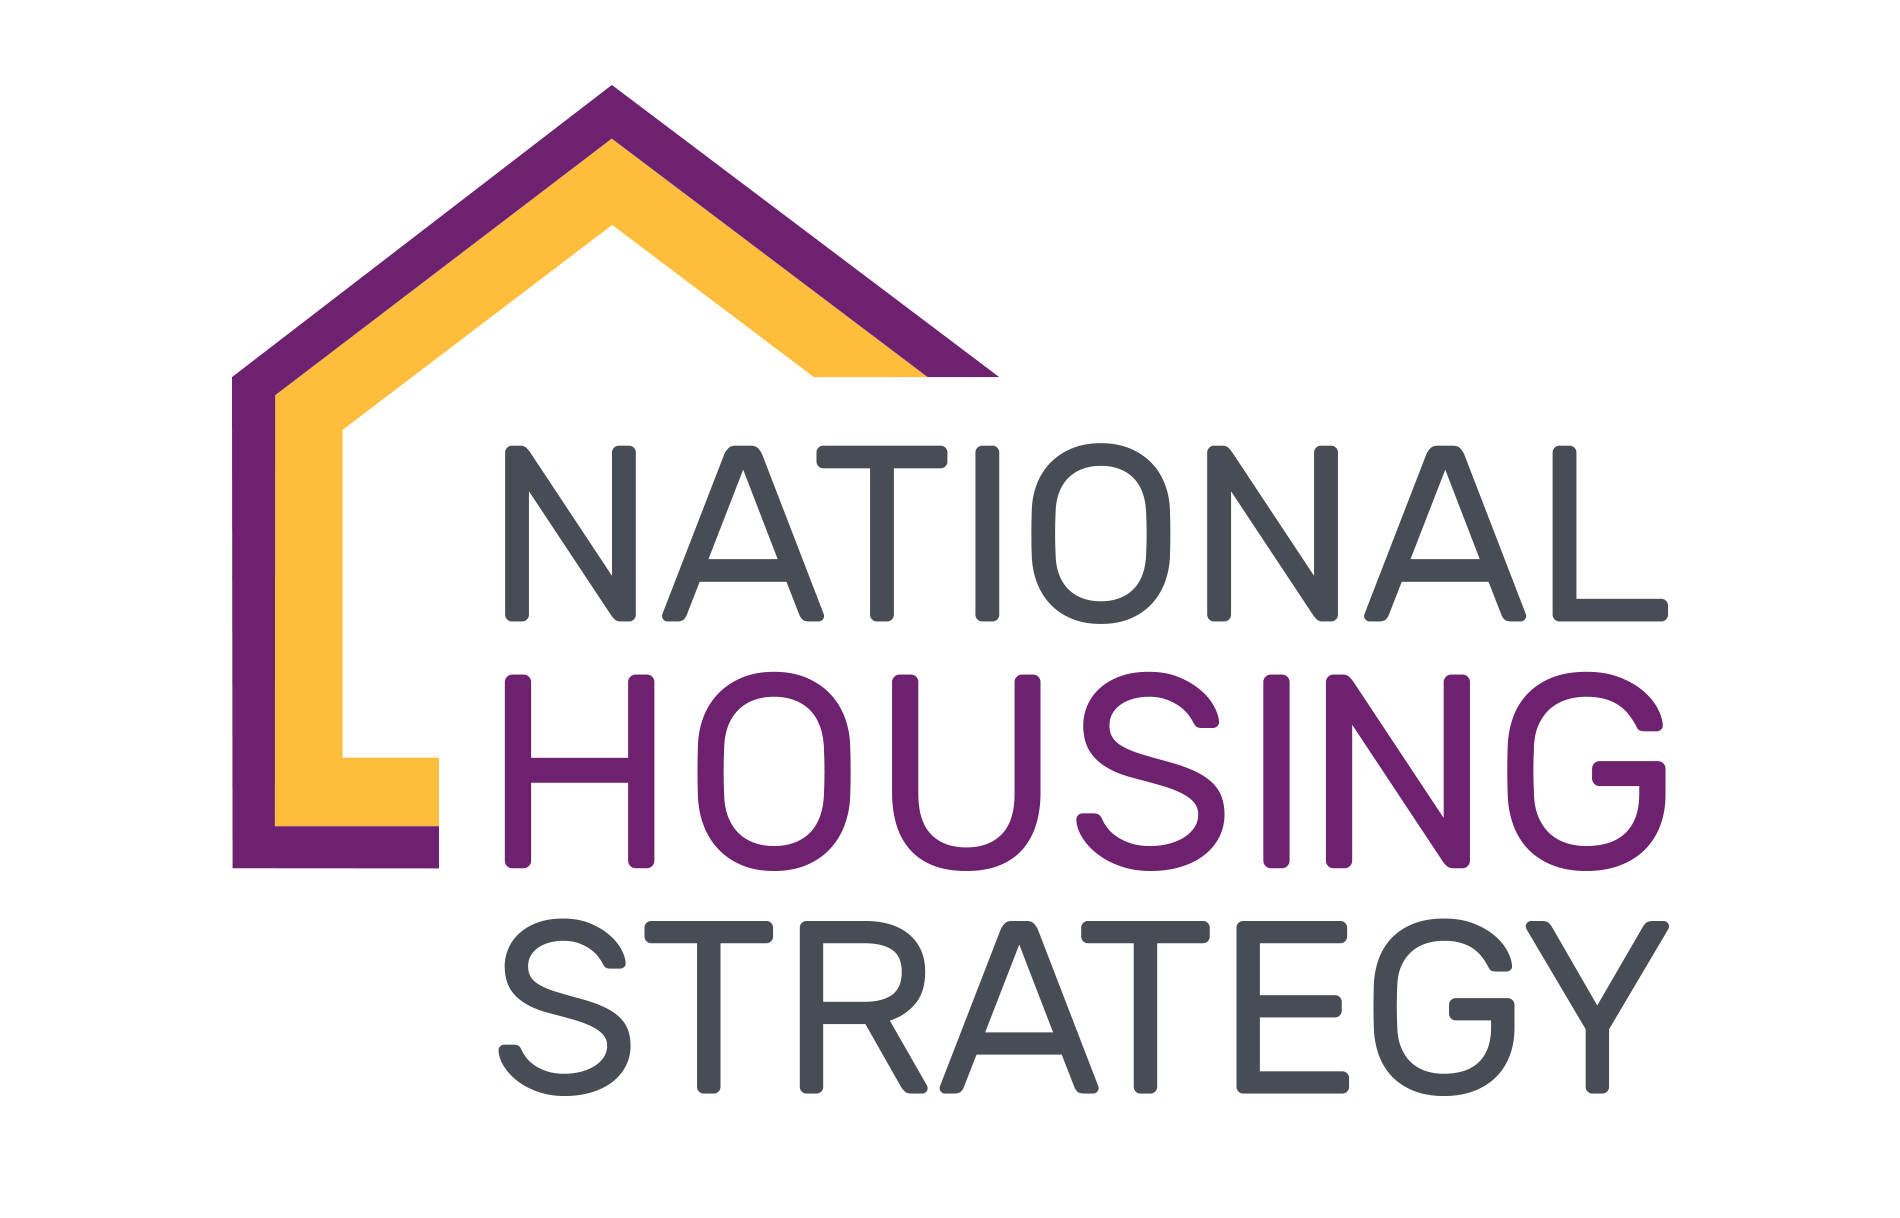 cmhc-national-housing-strategy.png